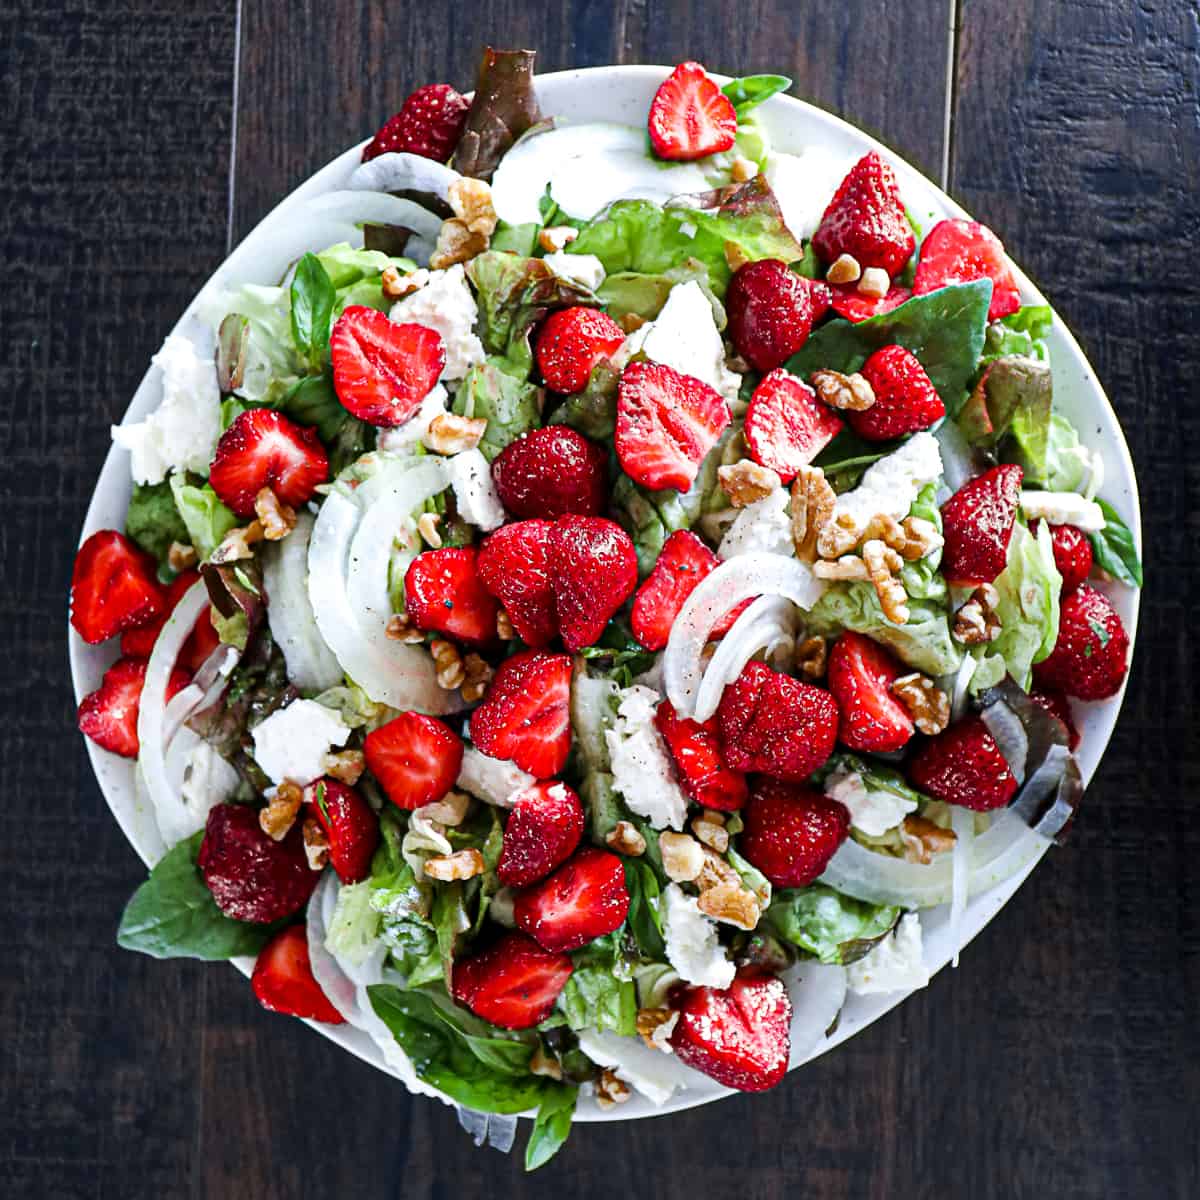 Top down shot of Strawberry Feta Salad With Walnuts and Basil Dressing on a plate.